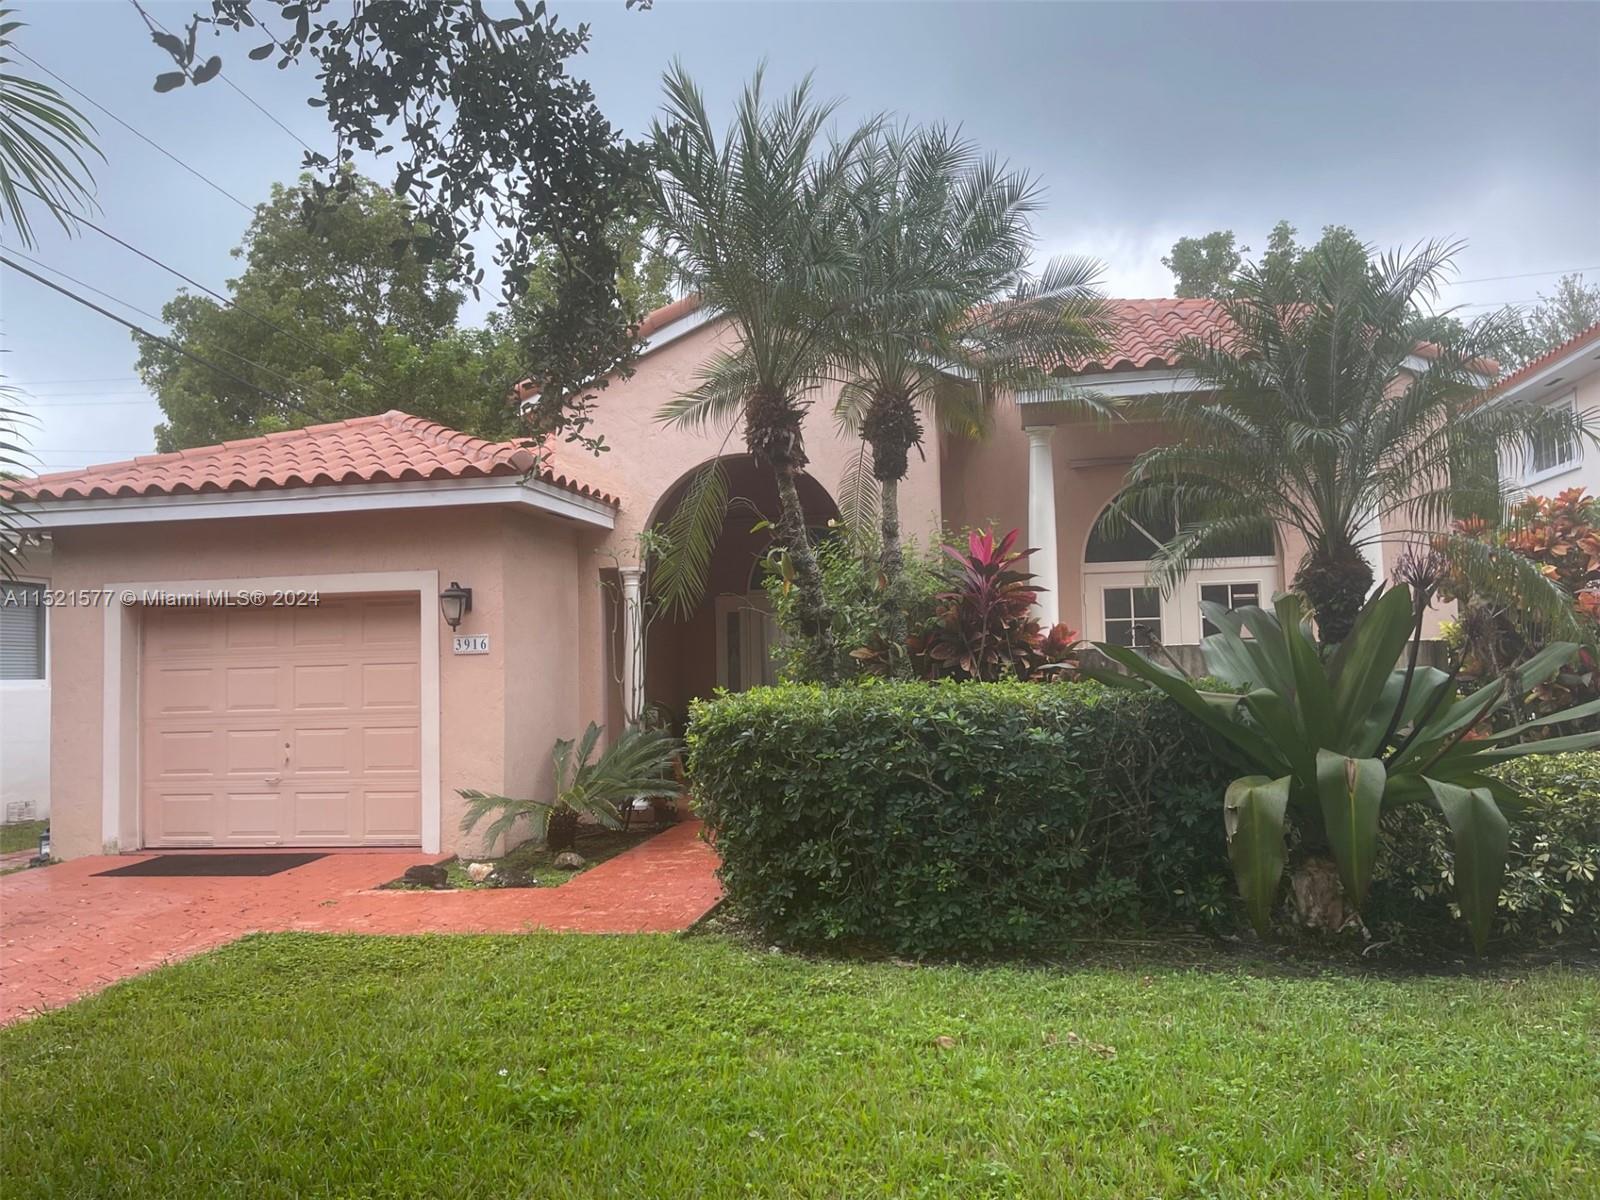 3916 Anderson Rd, Coral Gables FL 33134